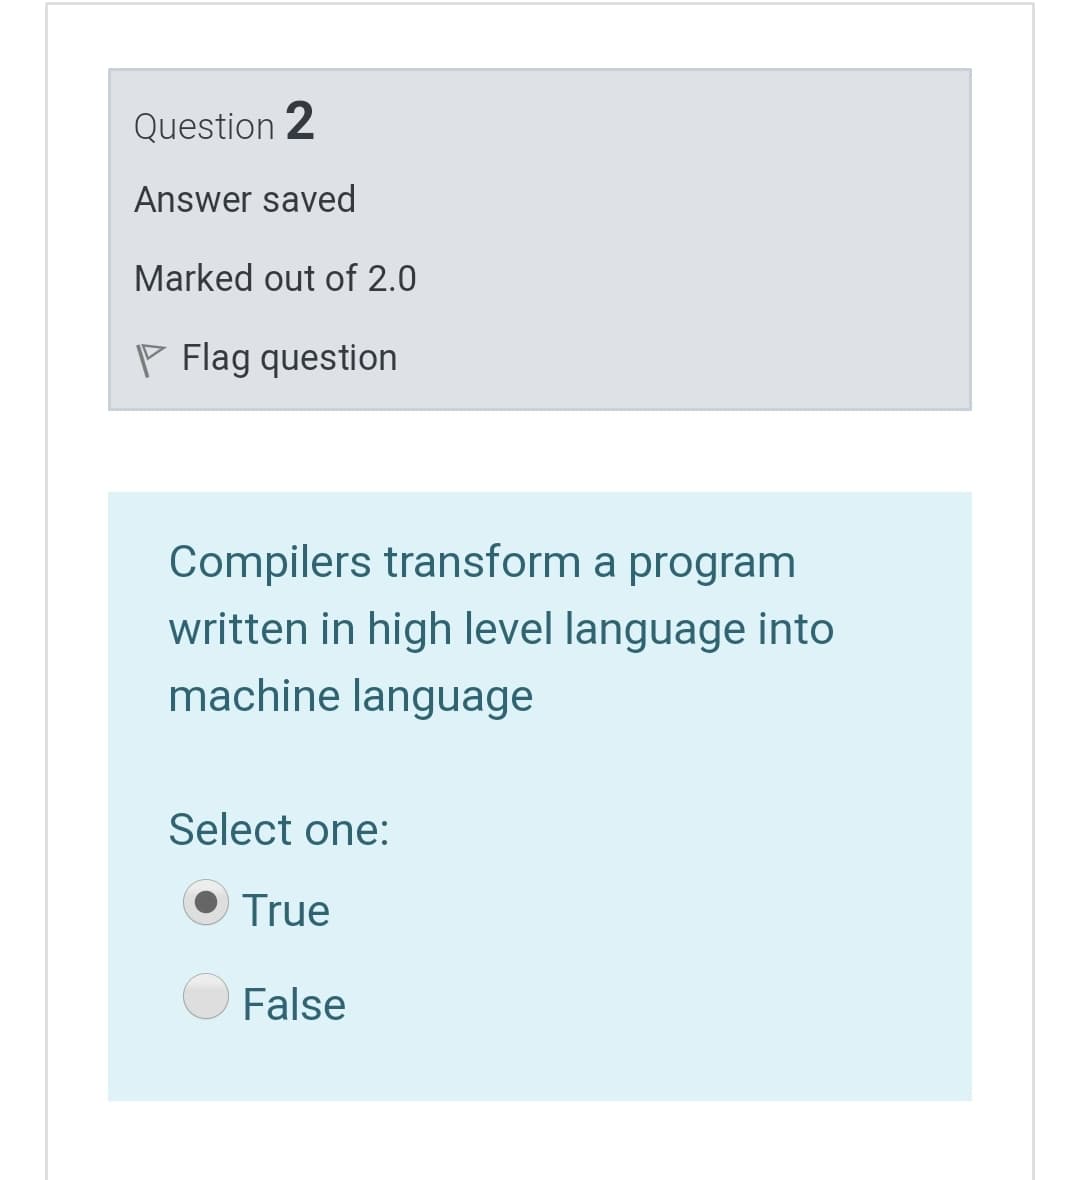 Question 2
Answer saved
Marked out of 2.0
P Flag question
Compilers transform a program
written in high level language into
machine language
Select one:
True
False
